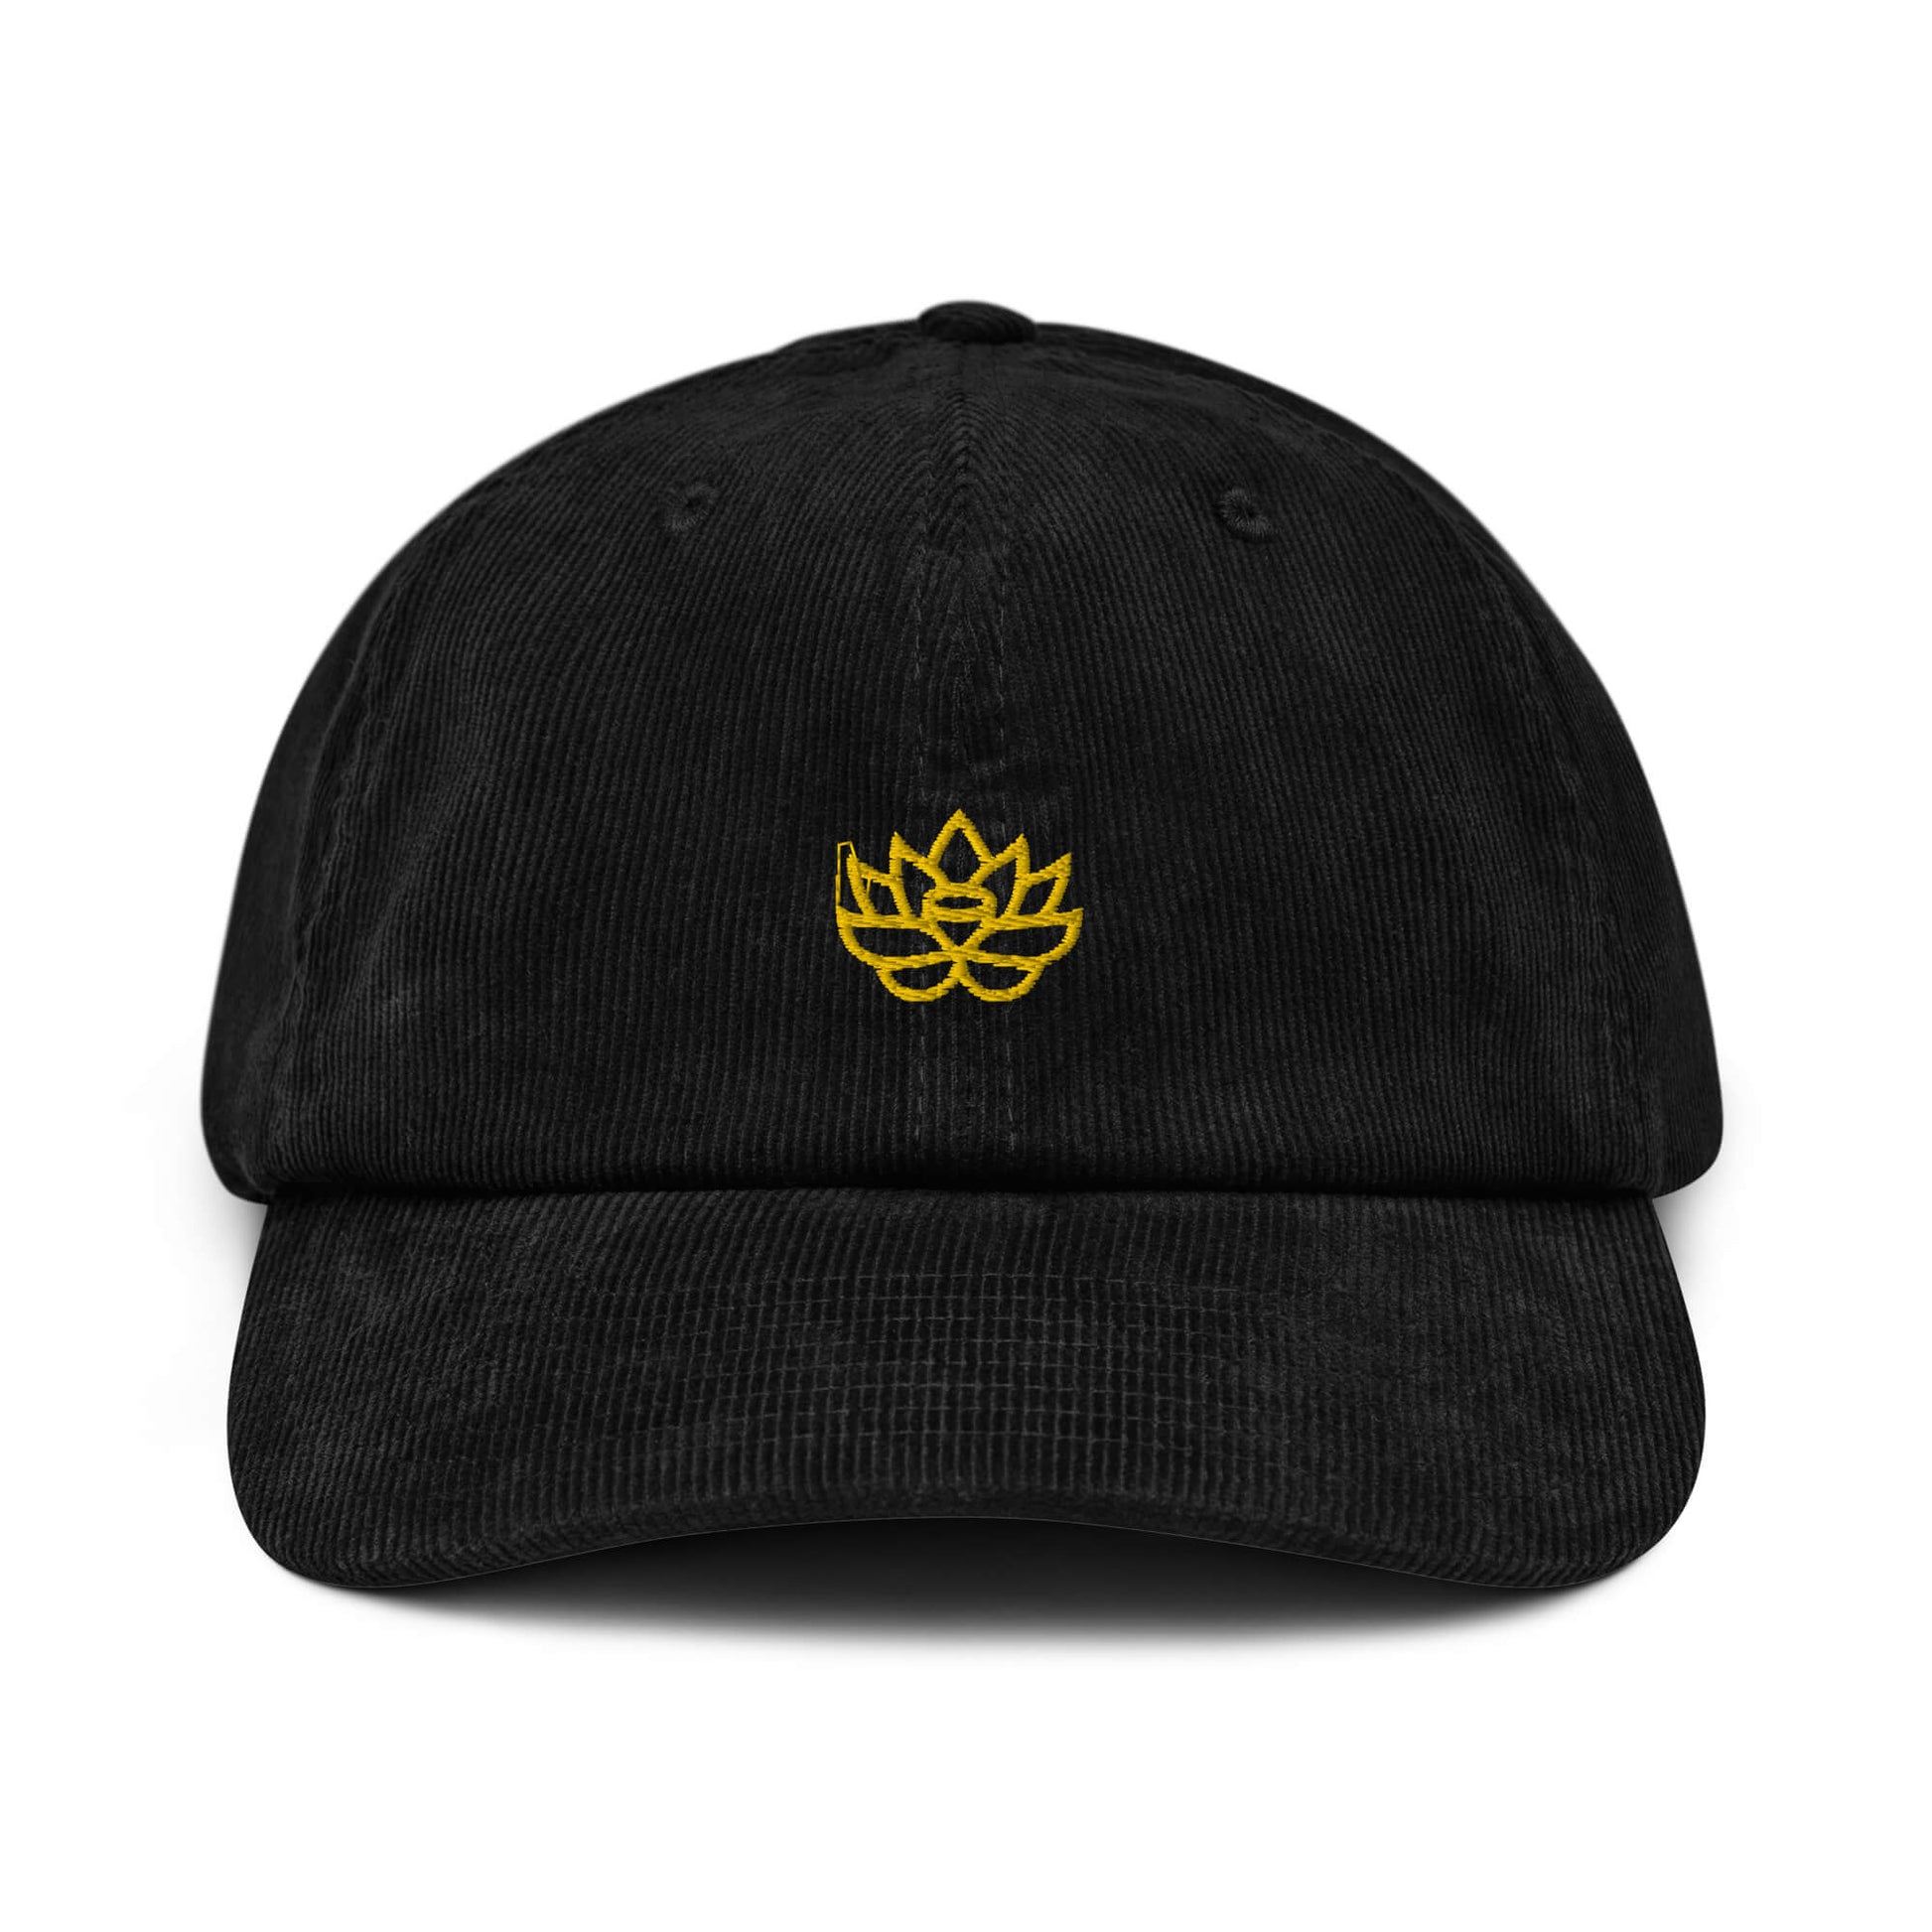 Corduroy Hat Black with Yellow Lily